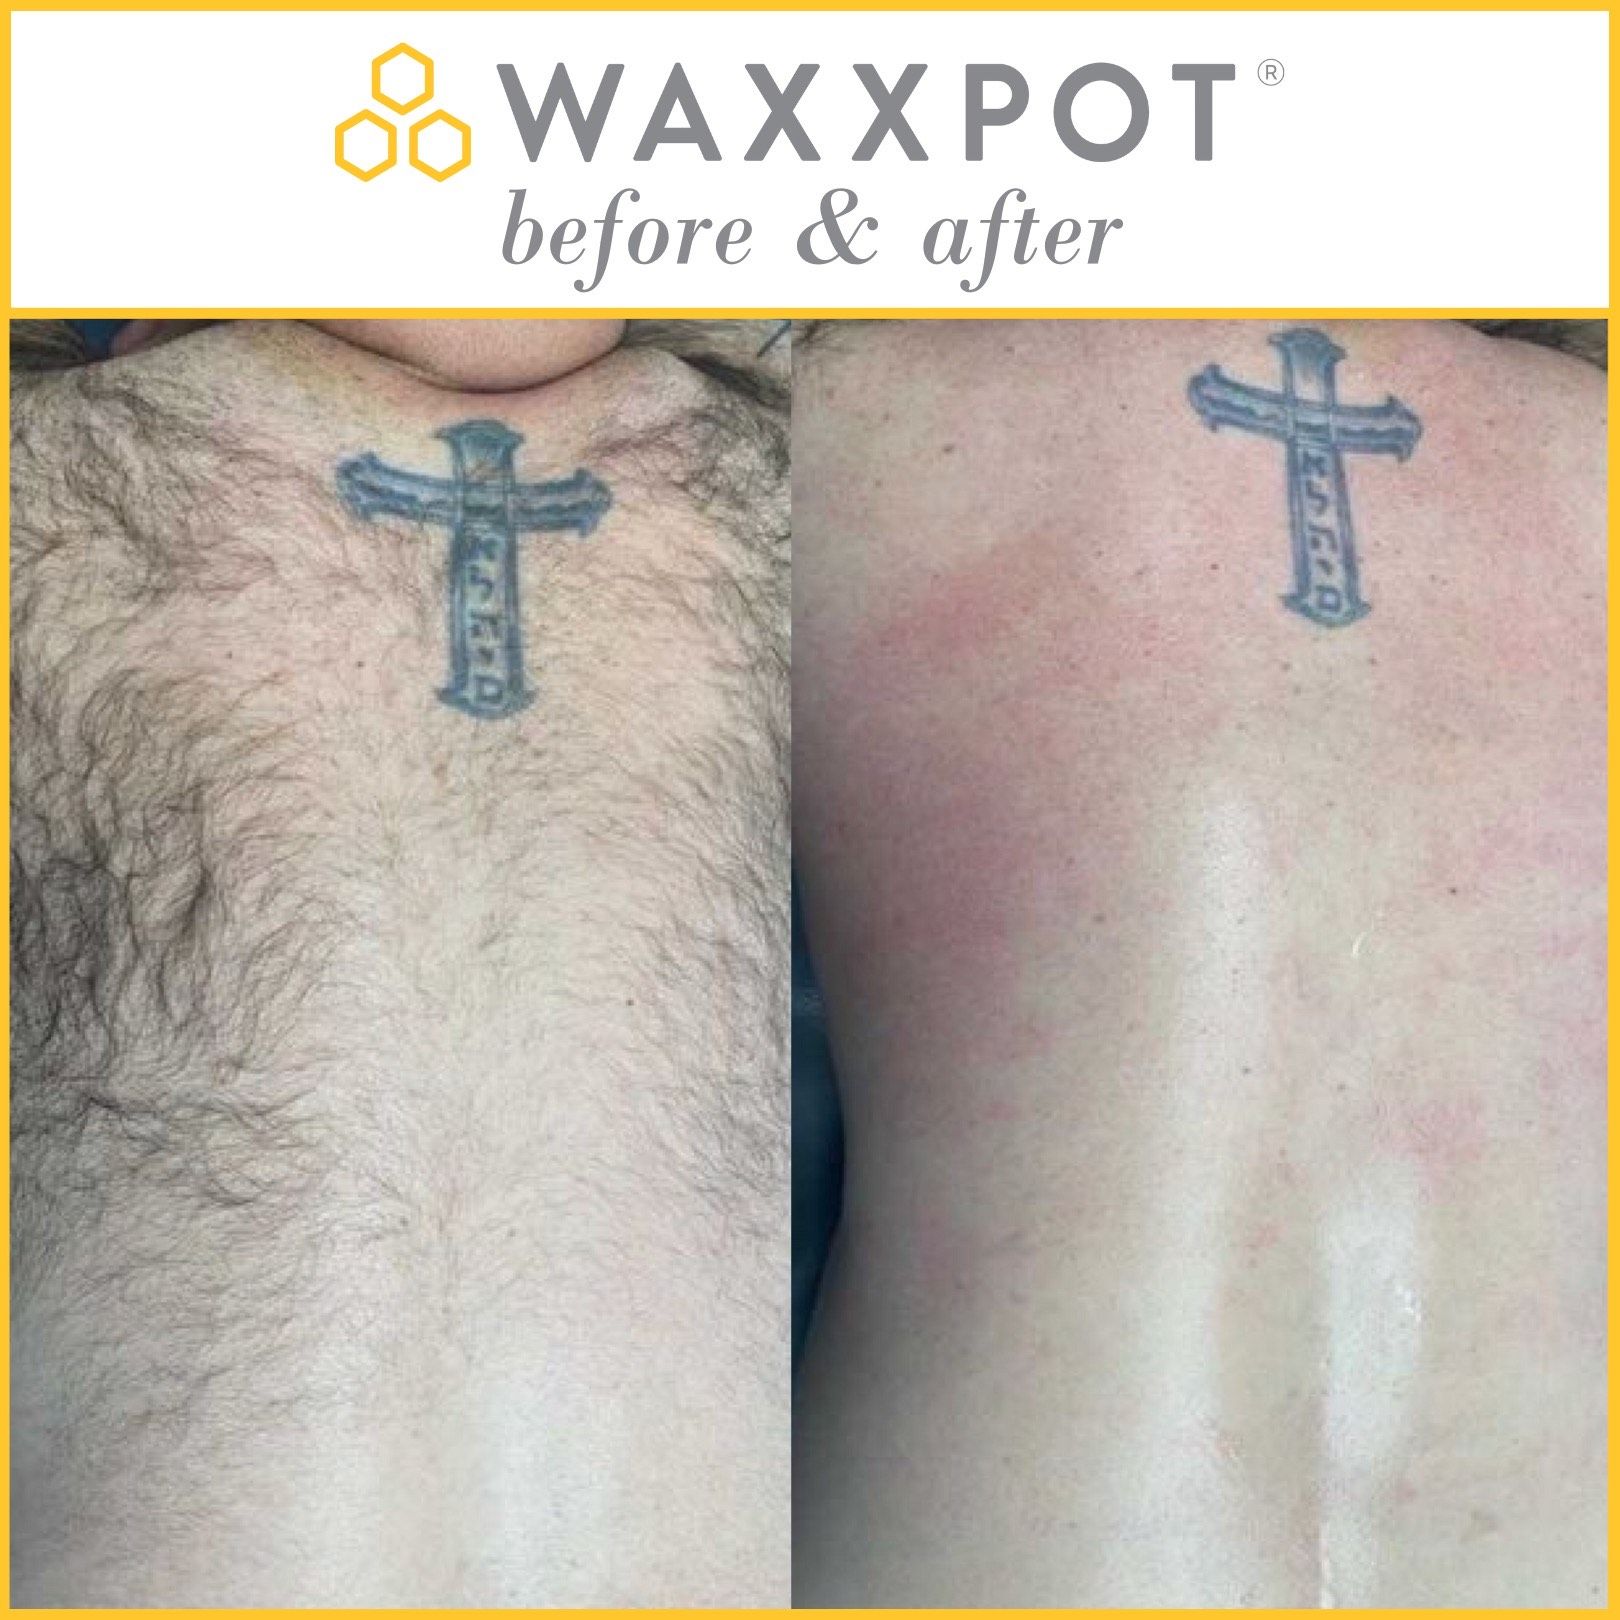 Waxxpot Before & After: Back Wax